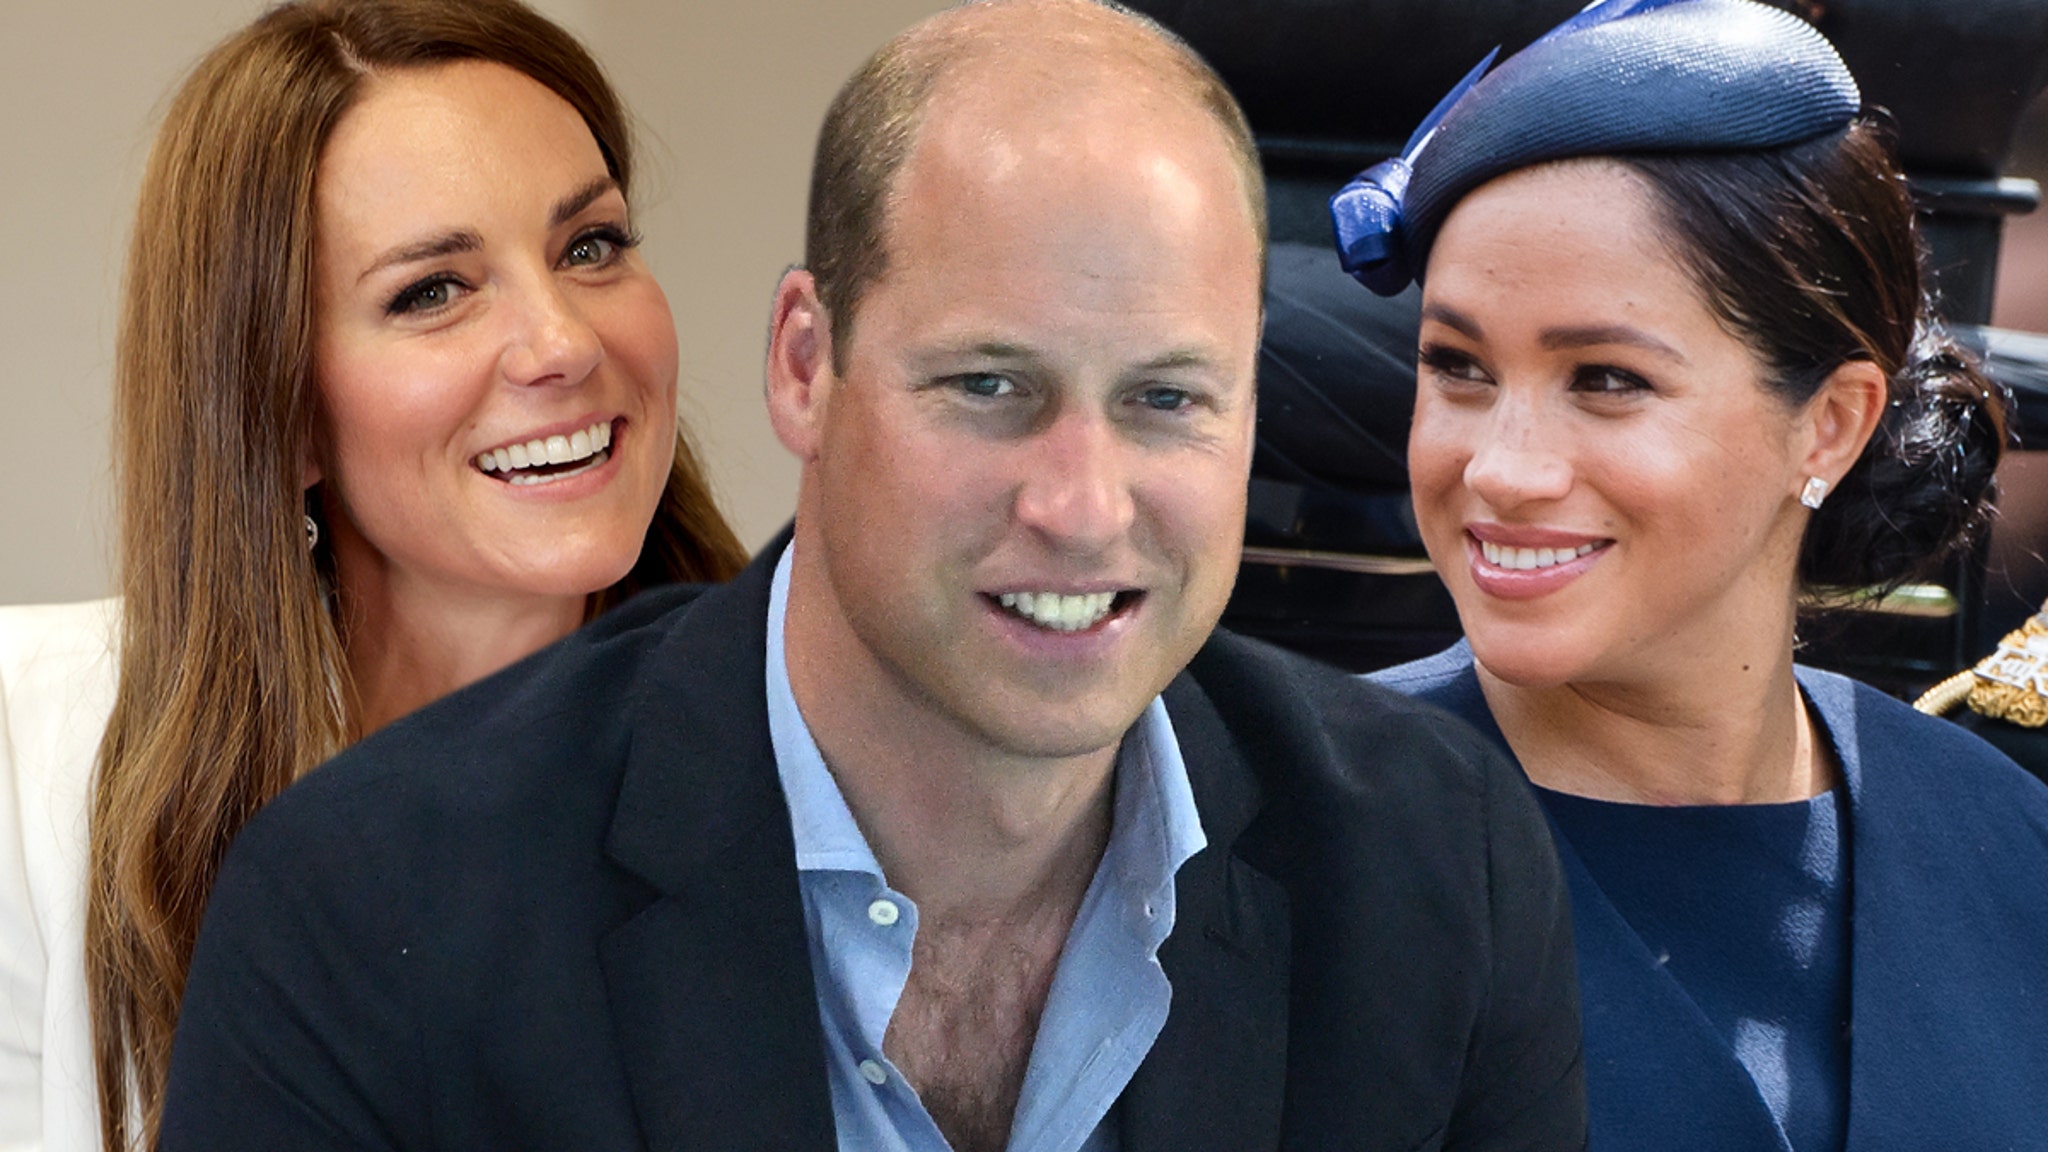 Kate Middleton and Prince William wish Meghan Markle a happy 41st birthday